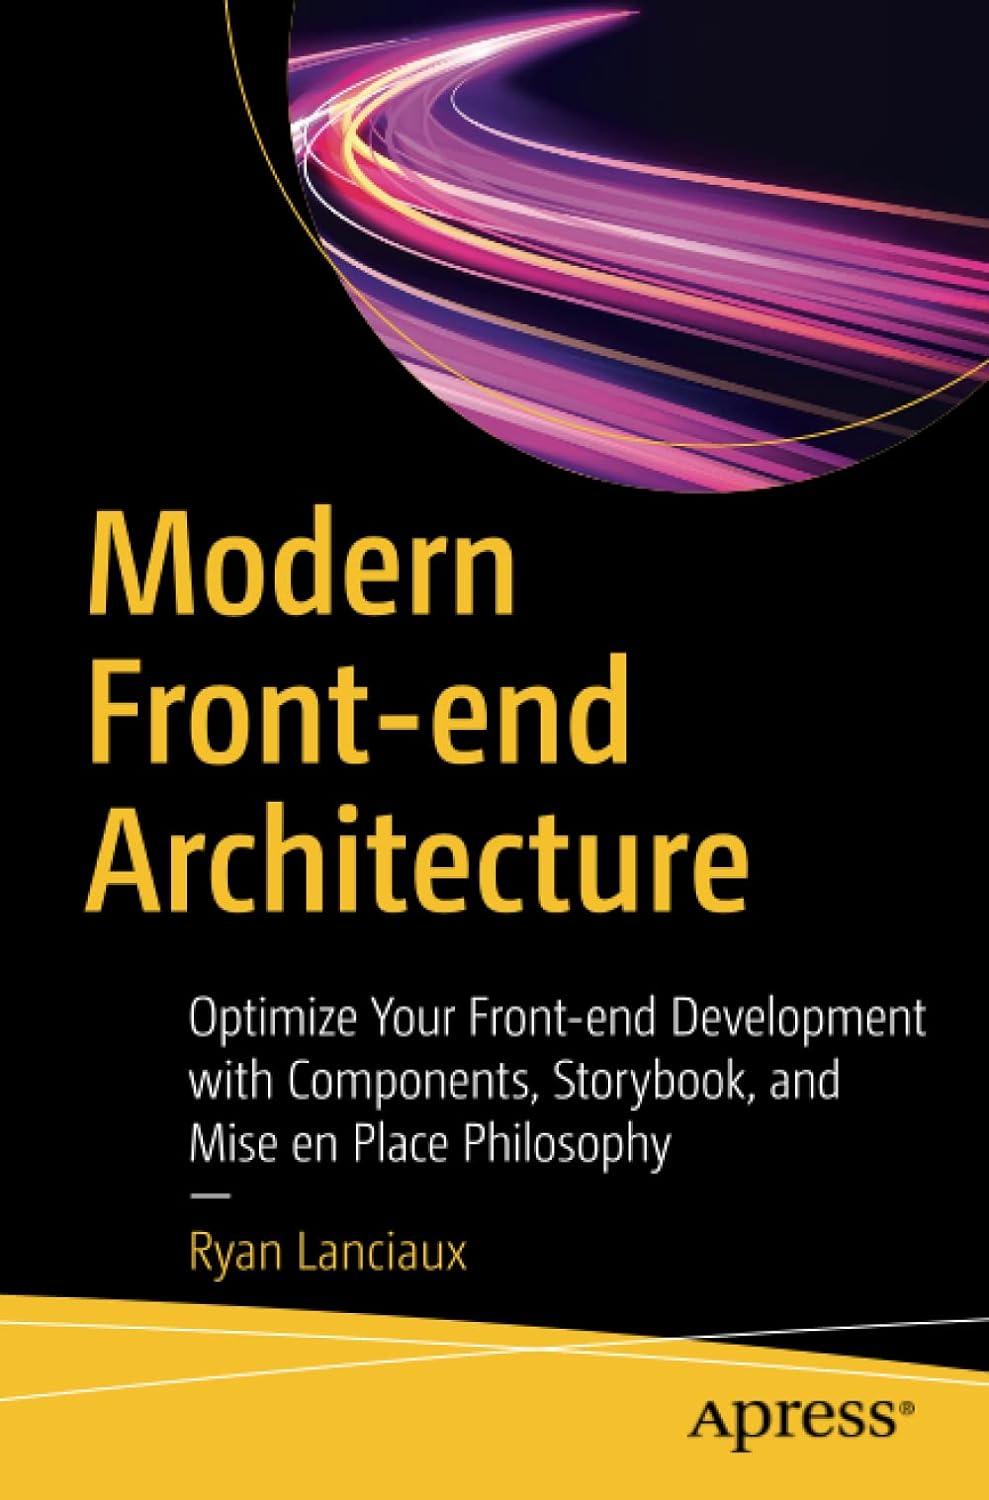 modern front end architecture optimize your front end development with components storybook and mise en place